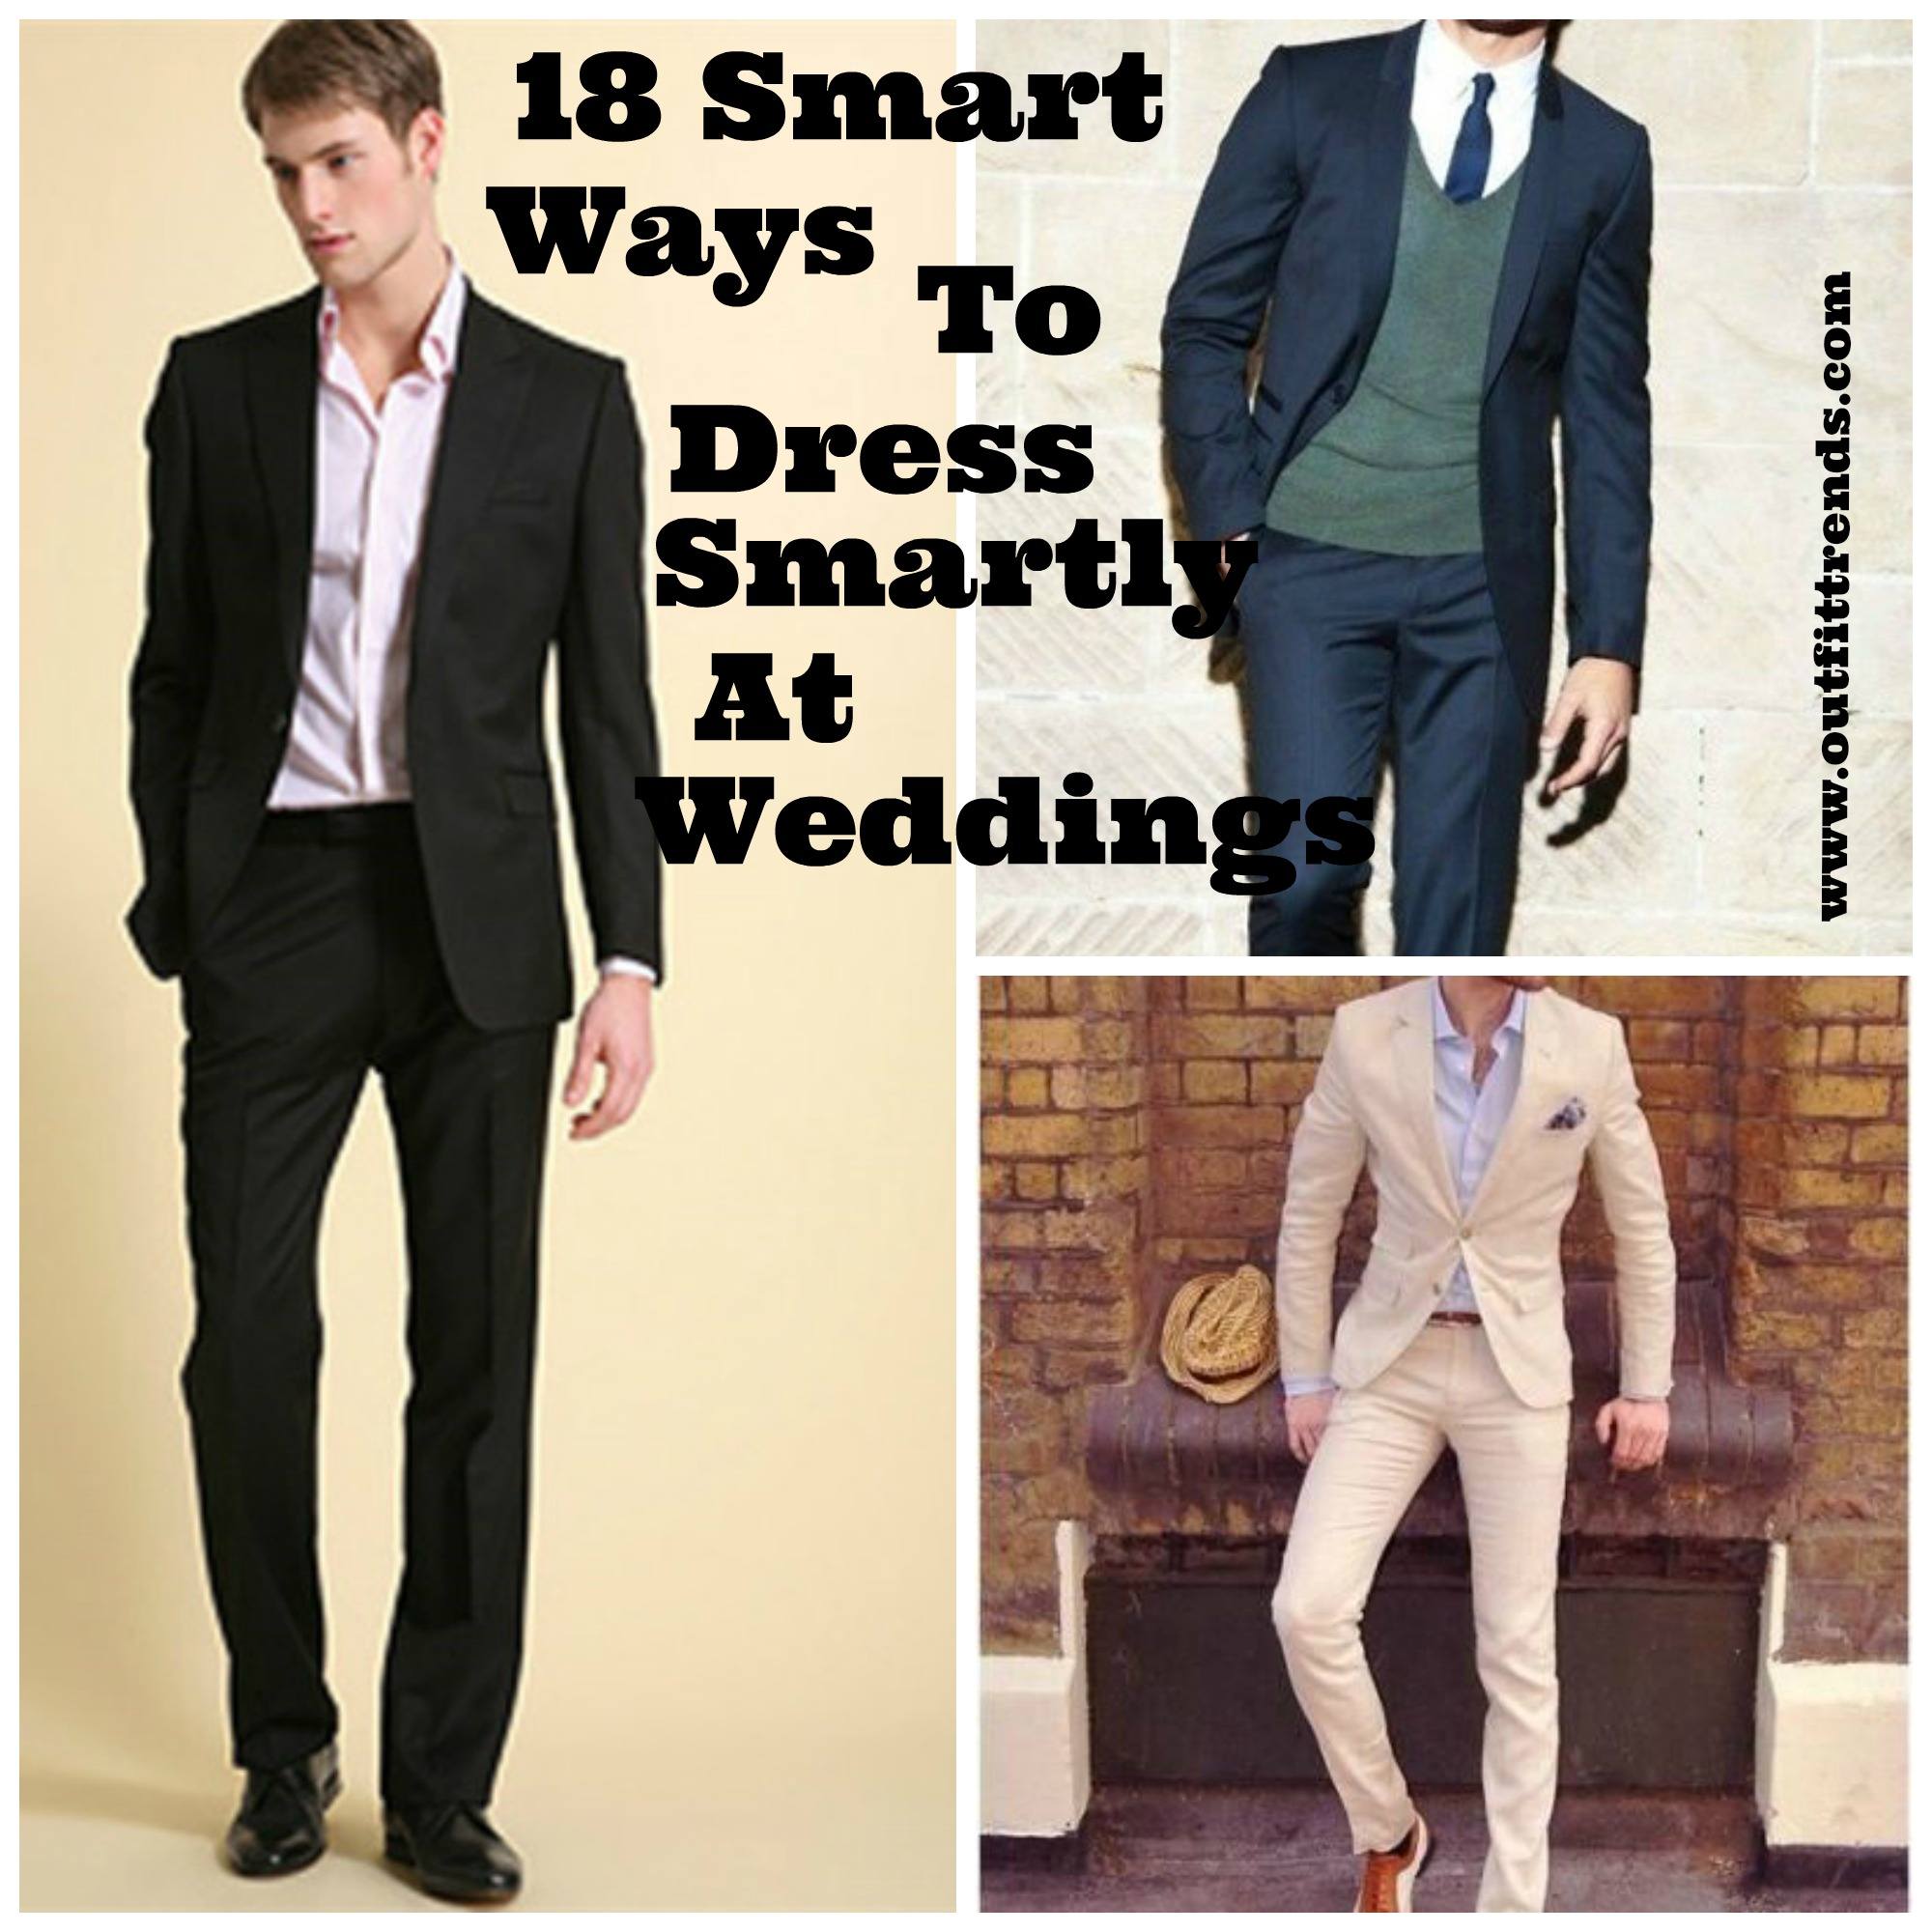 What Should Men Wear To A Wedding - Image to u